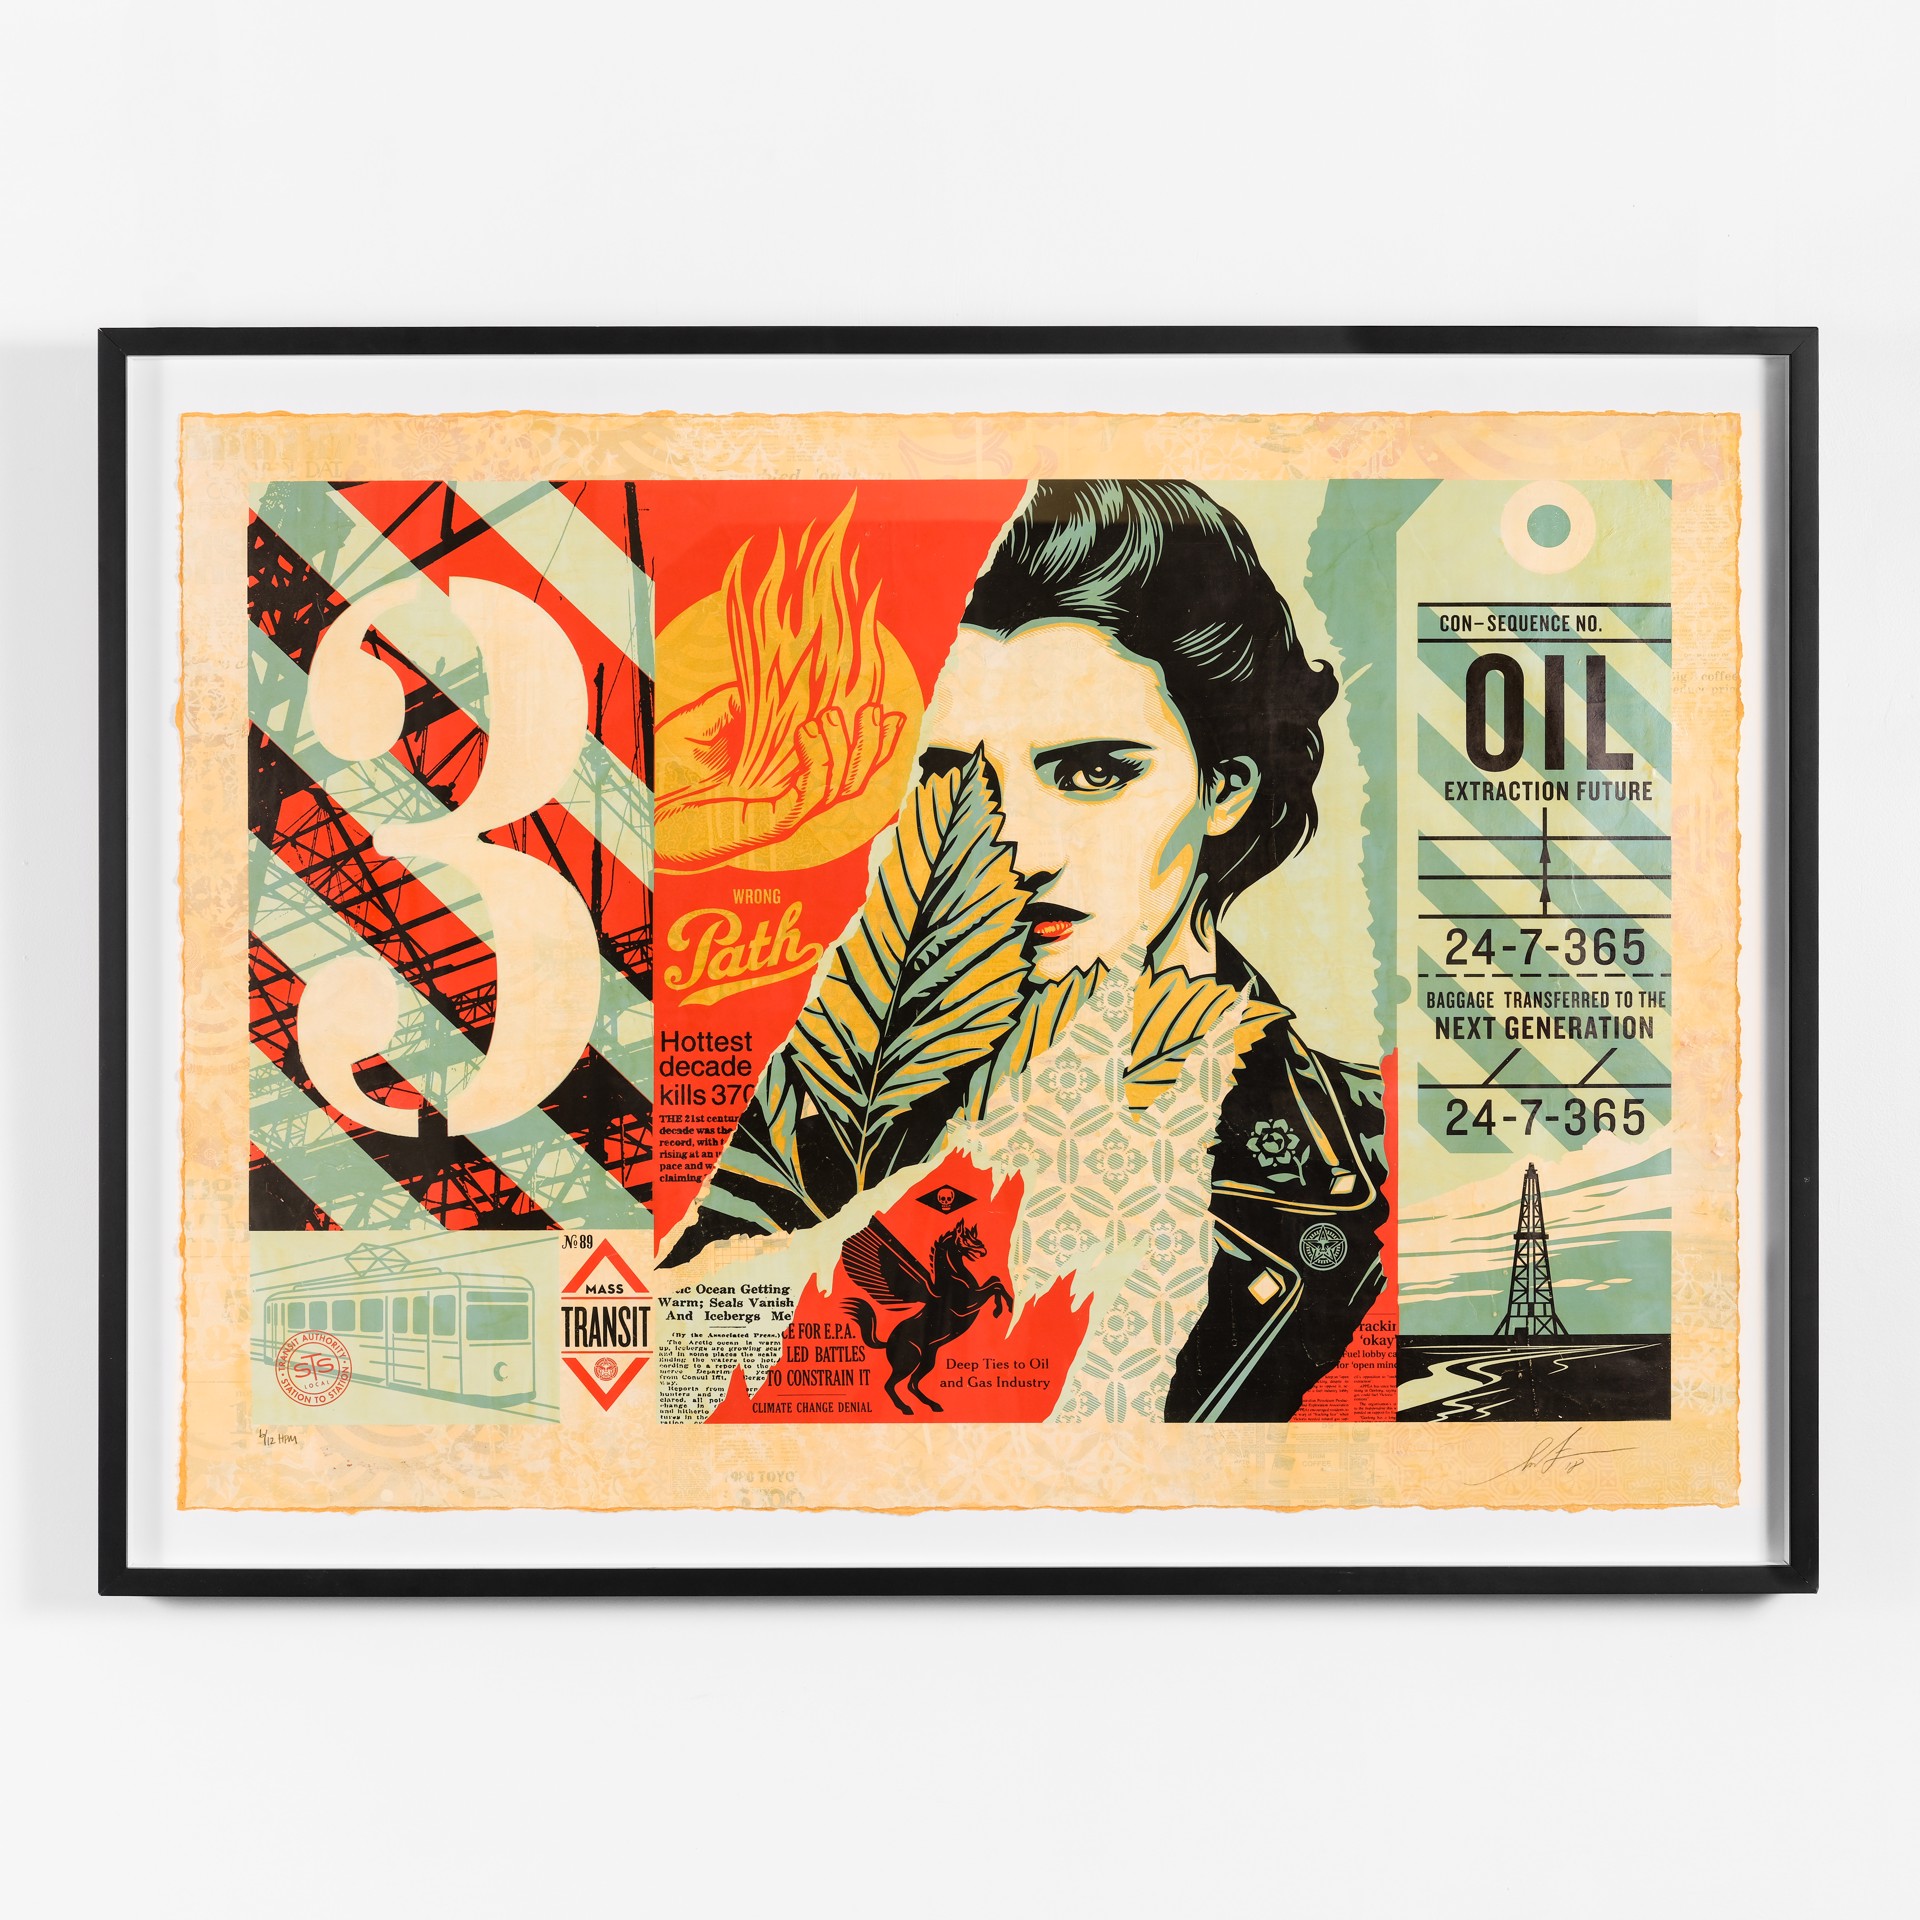 Wrong Path by Shepard Fairey / Limited editions